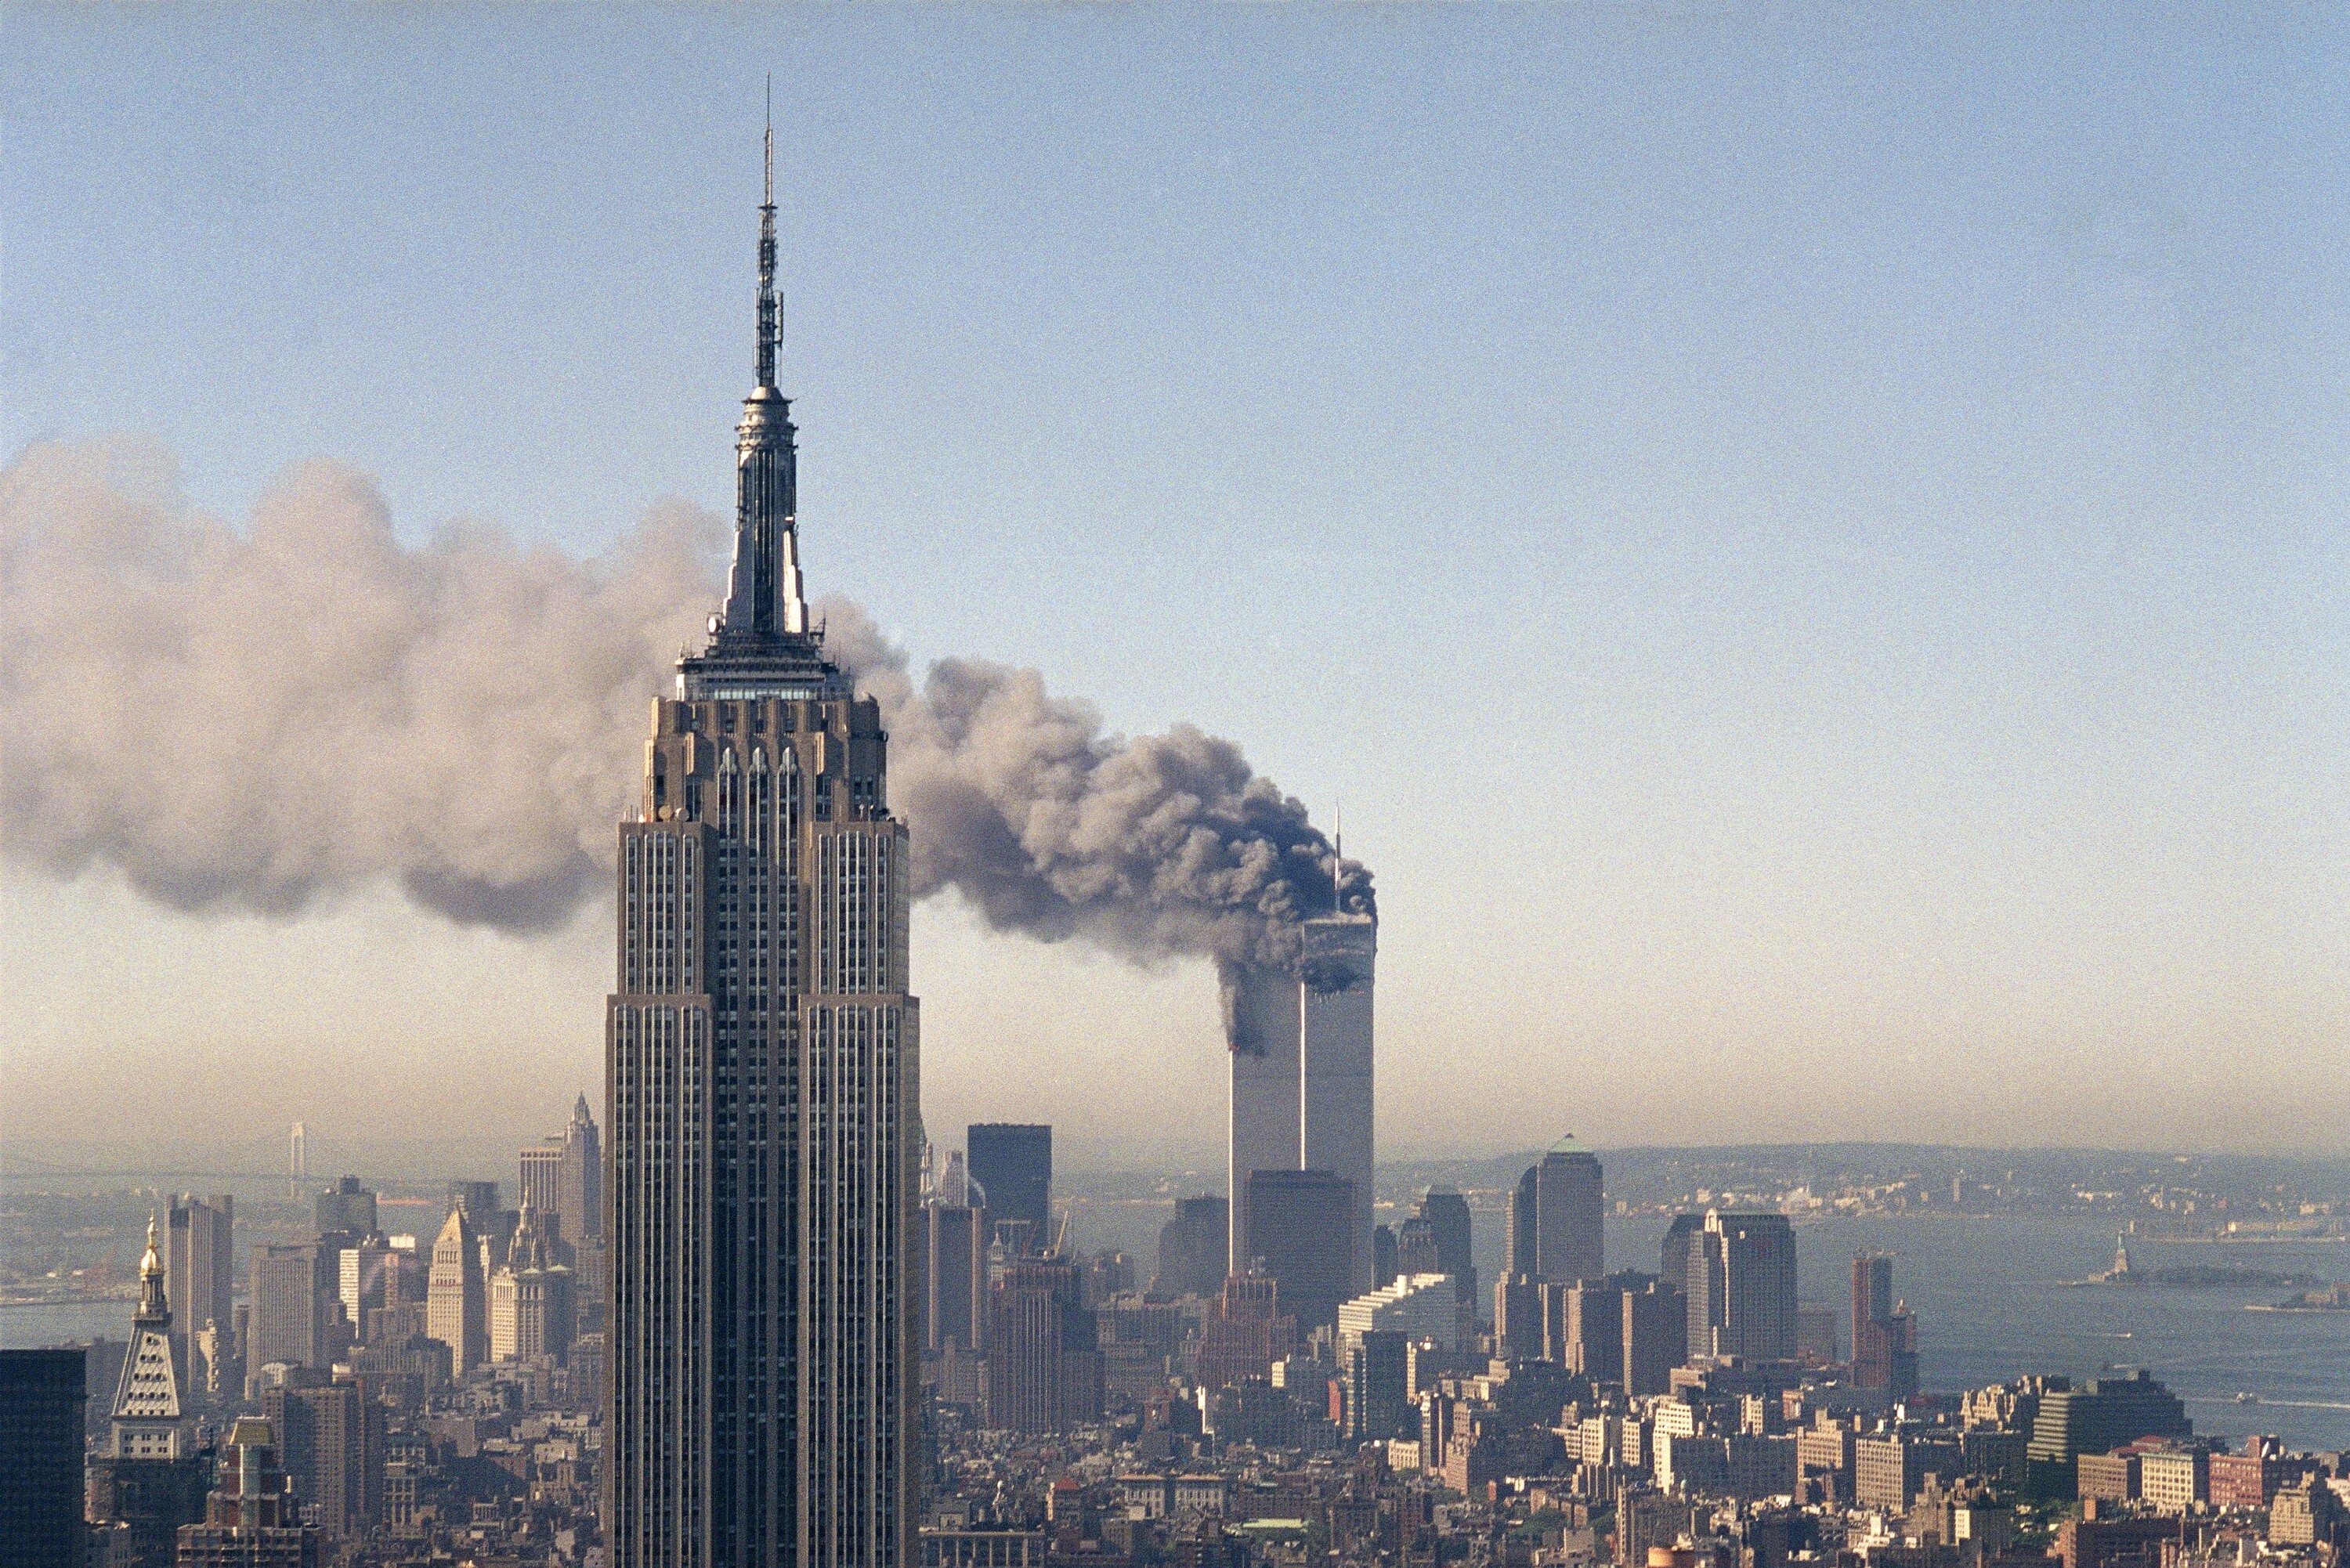 The twin towers of the World Trade Centre burn behind the Empire State Building on September 11, 2001. Photo: File, AP